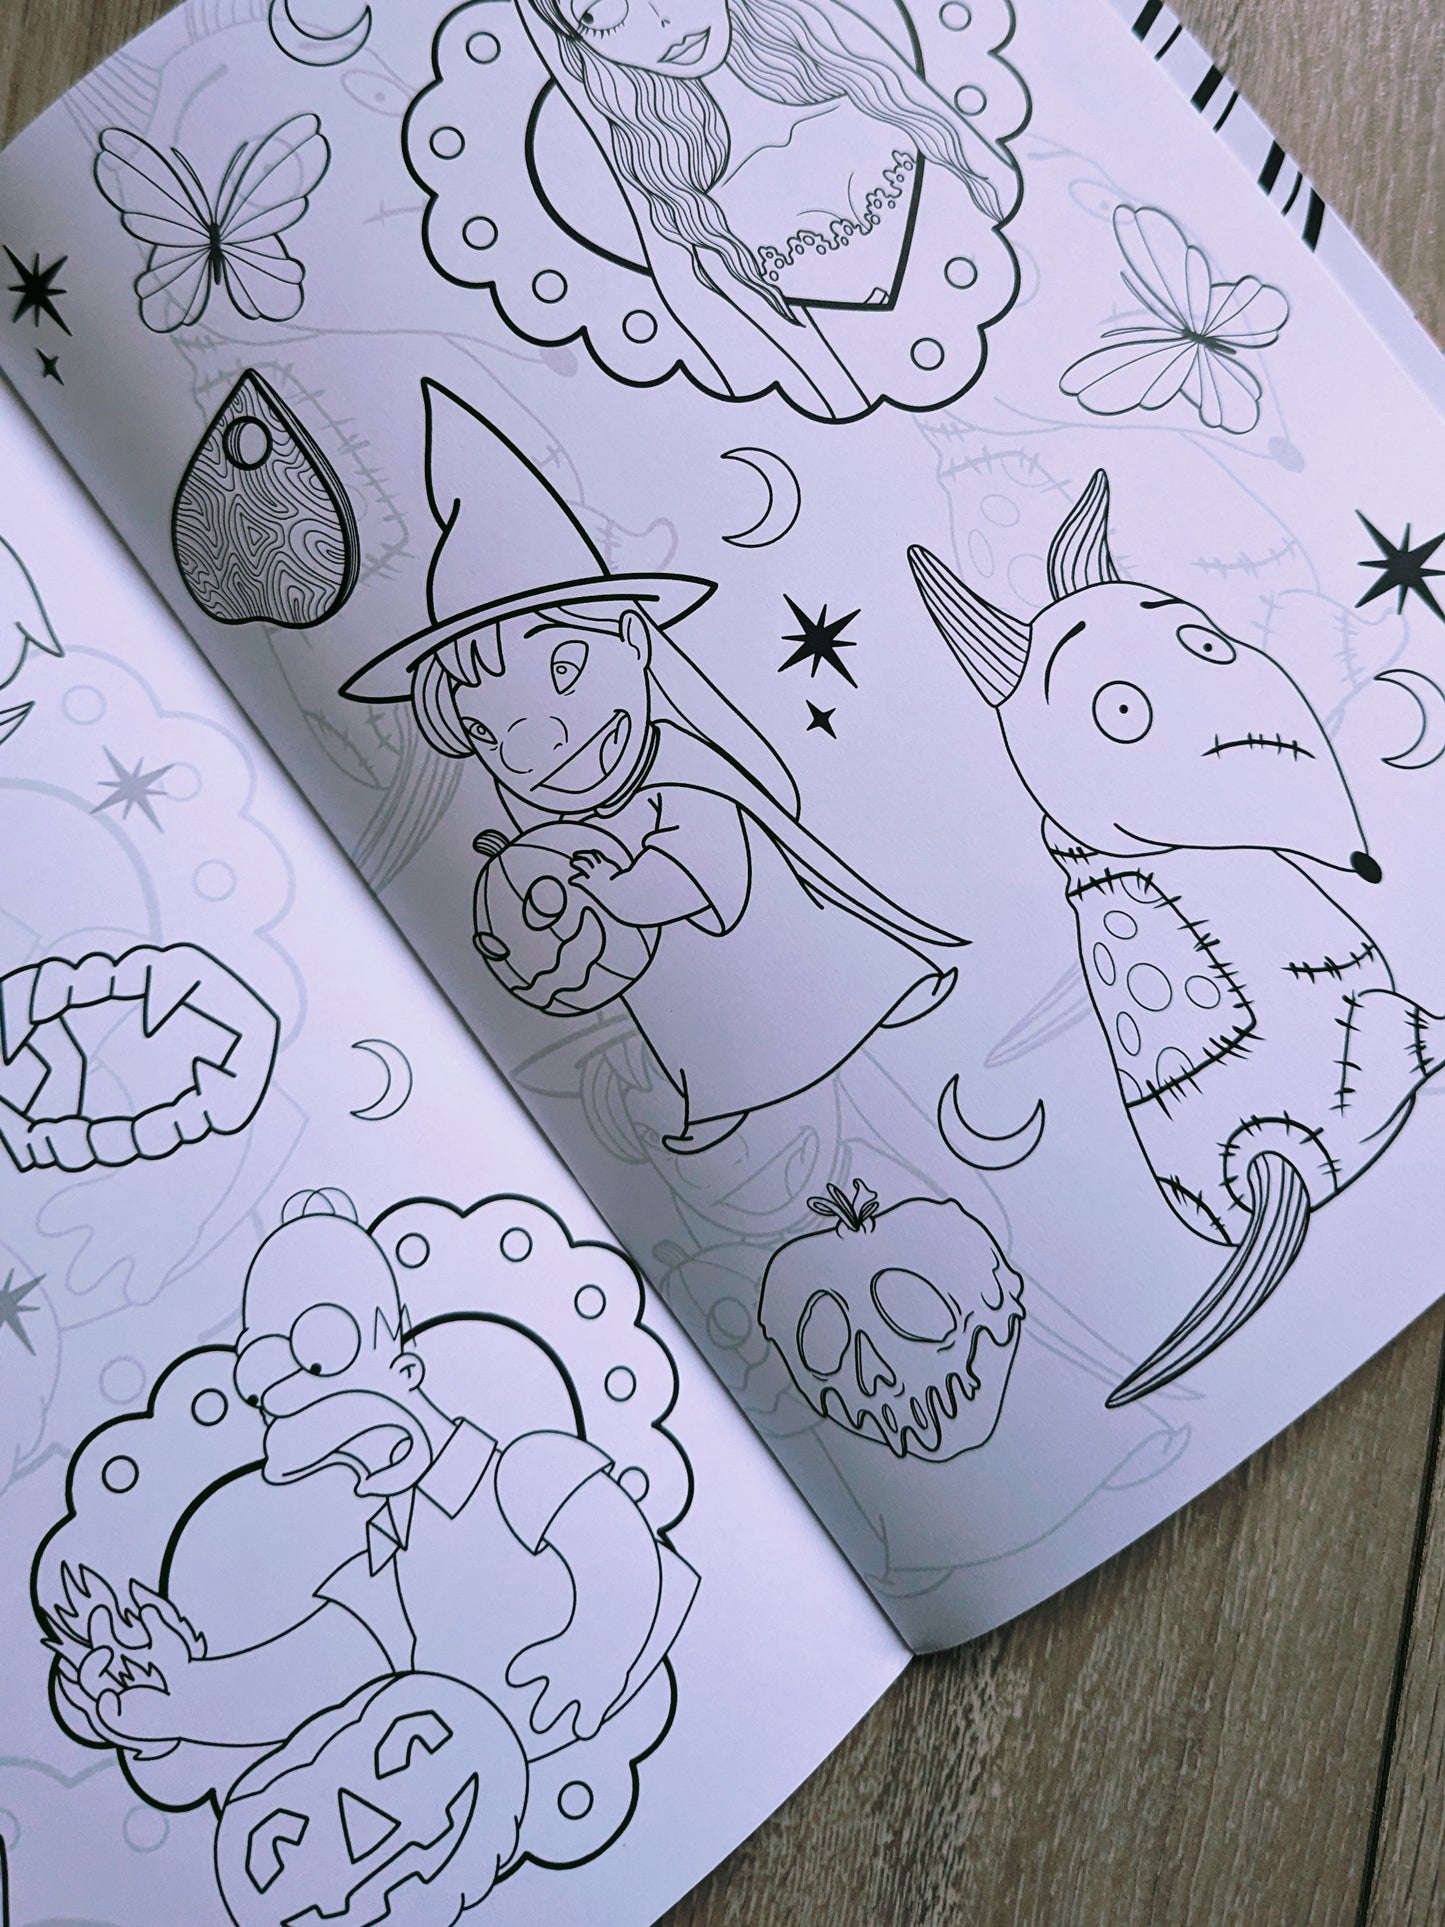 The Ultimate Halloween Colouring Book